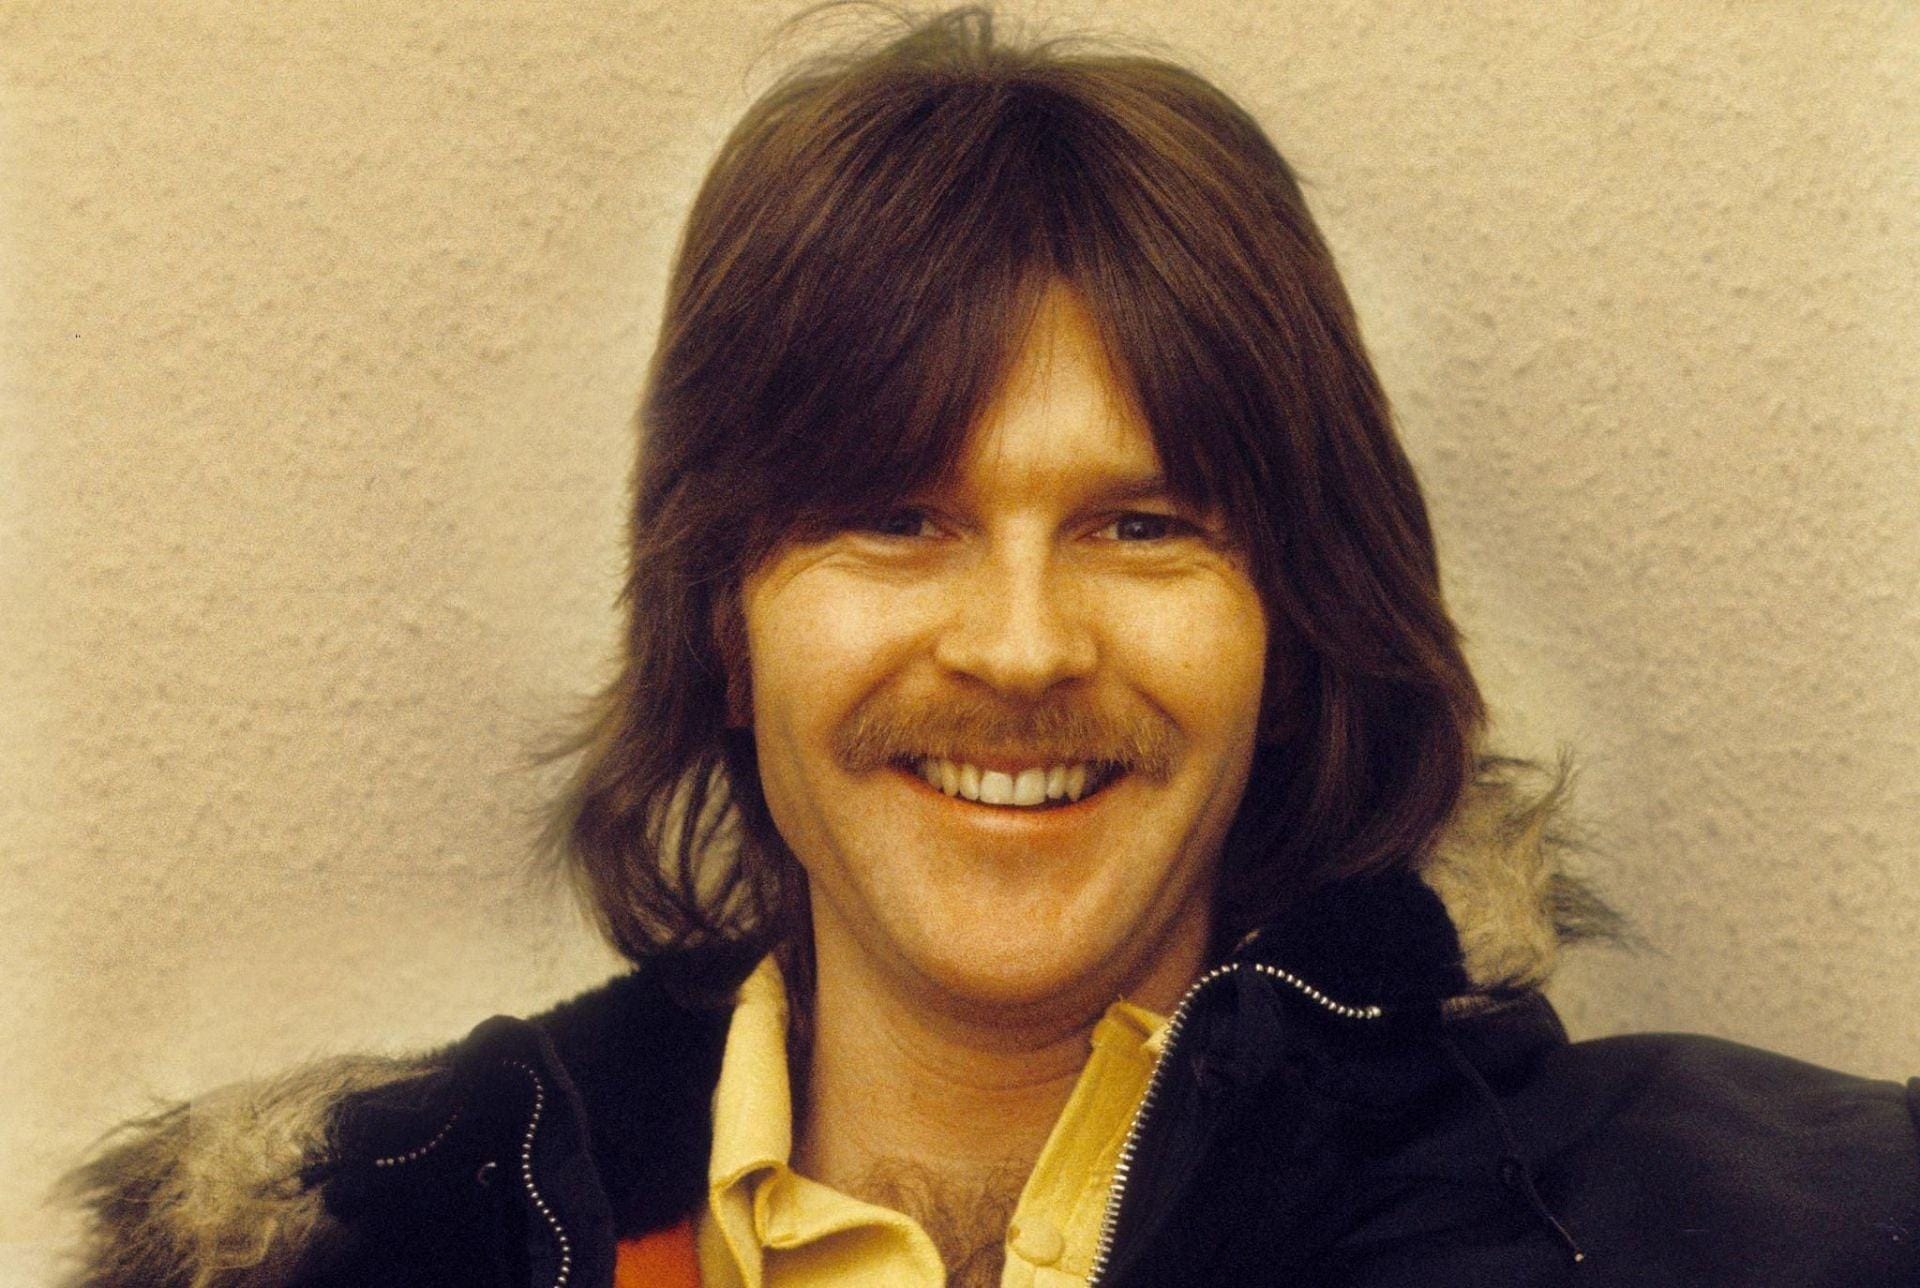 Randy Meisner at an interview in London in 1973 (Image via Getty Images)